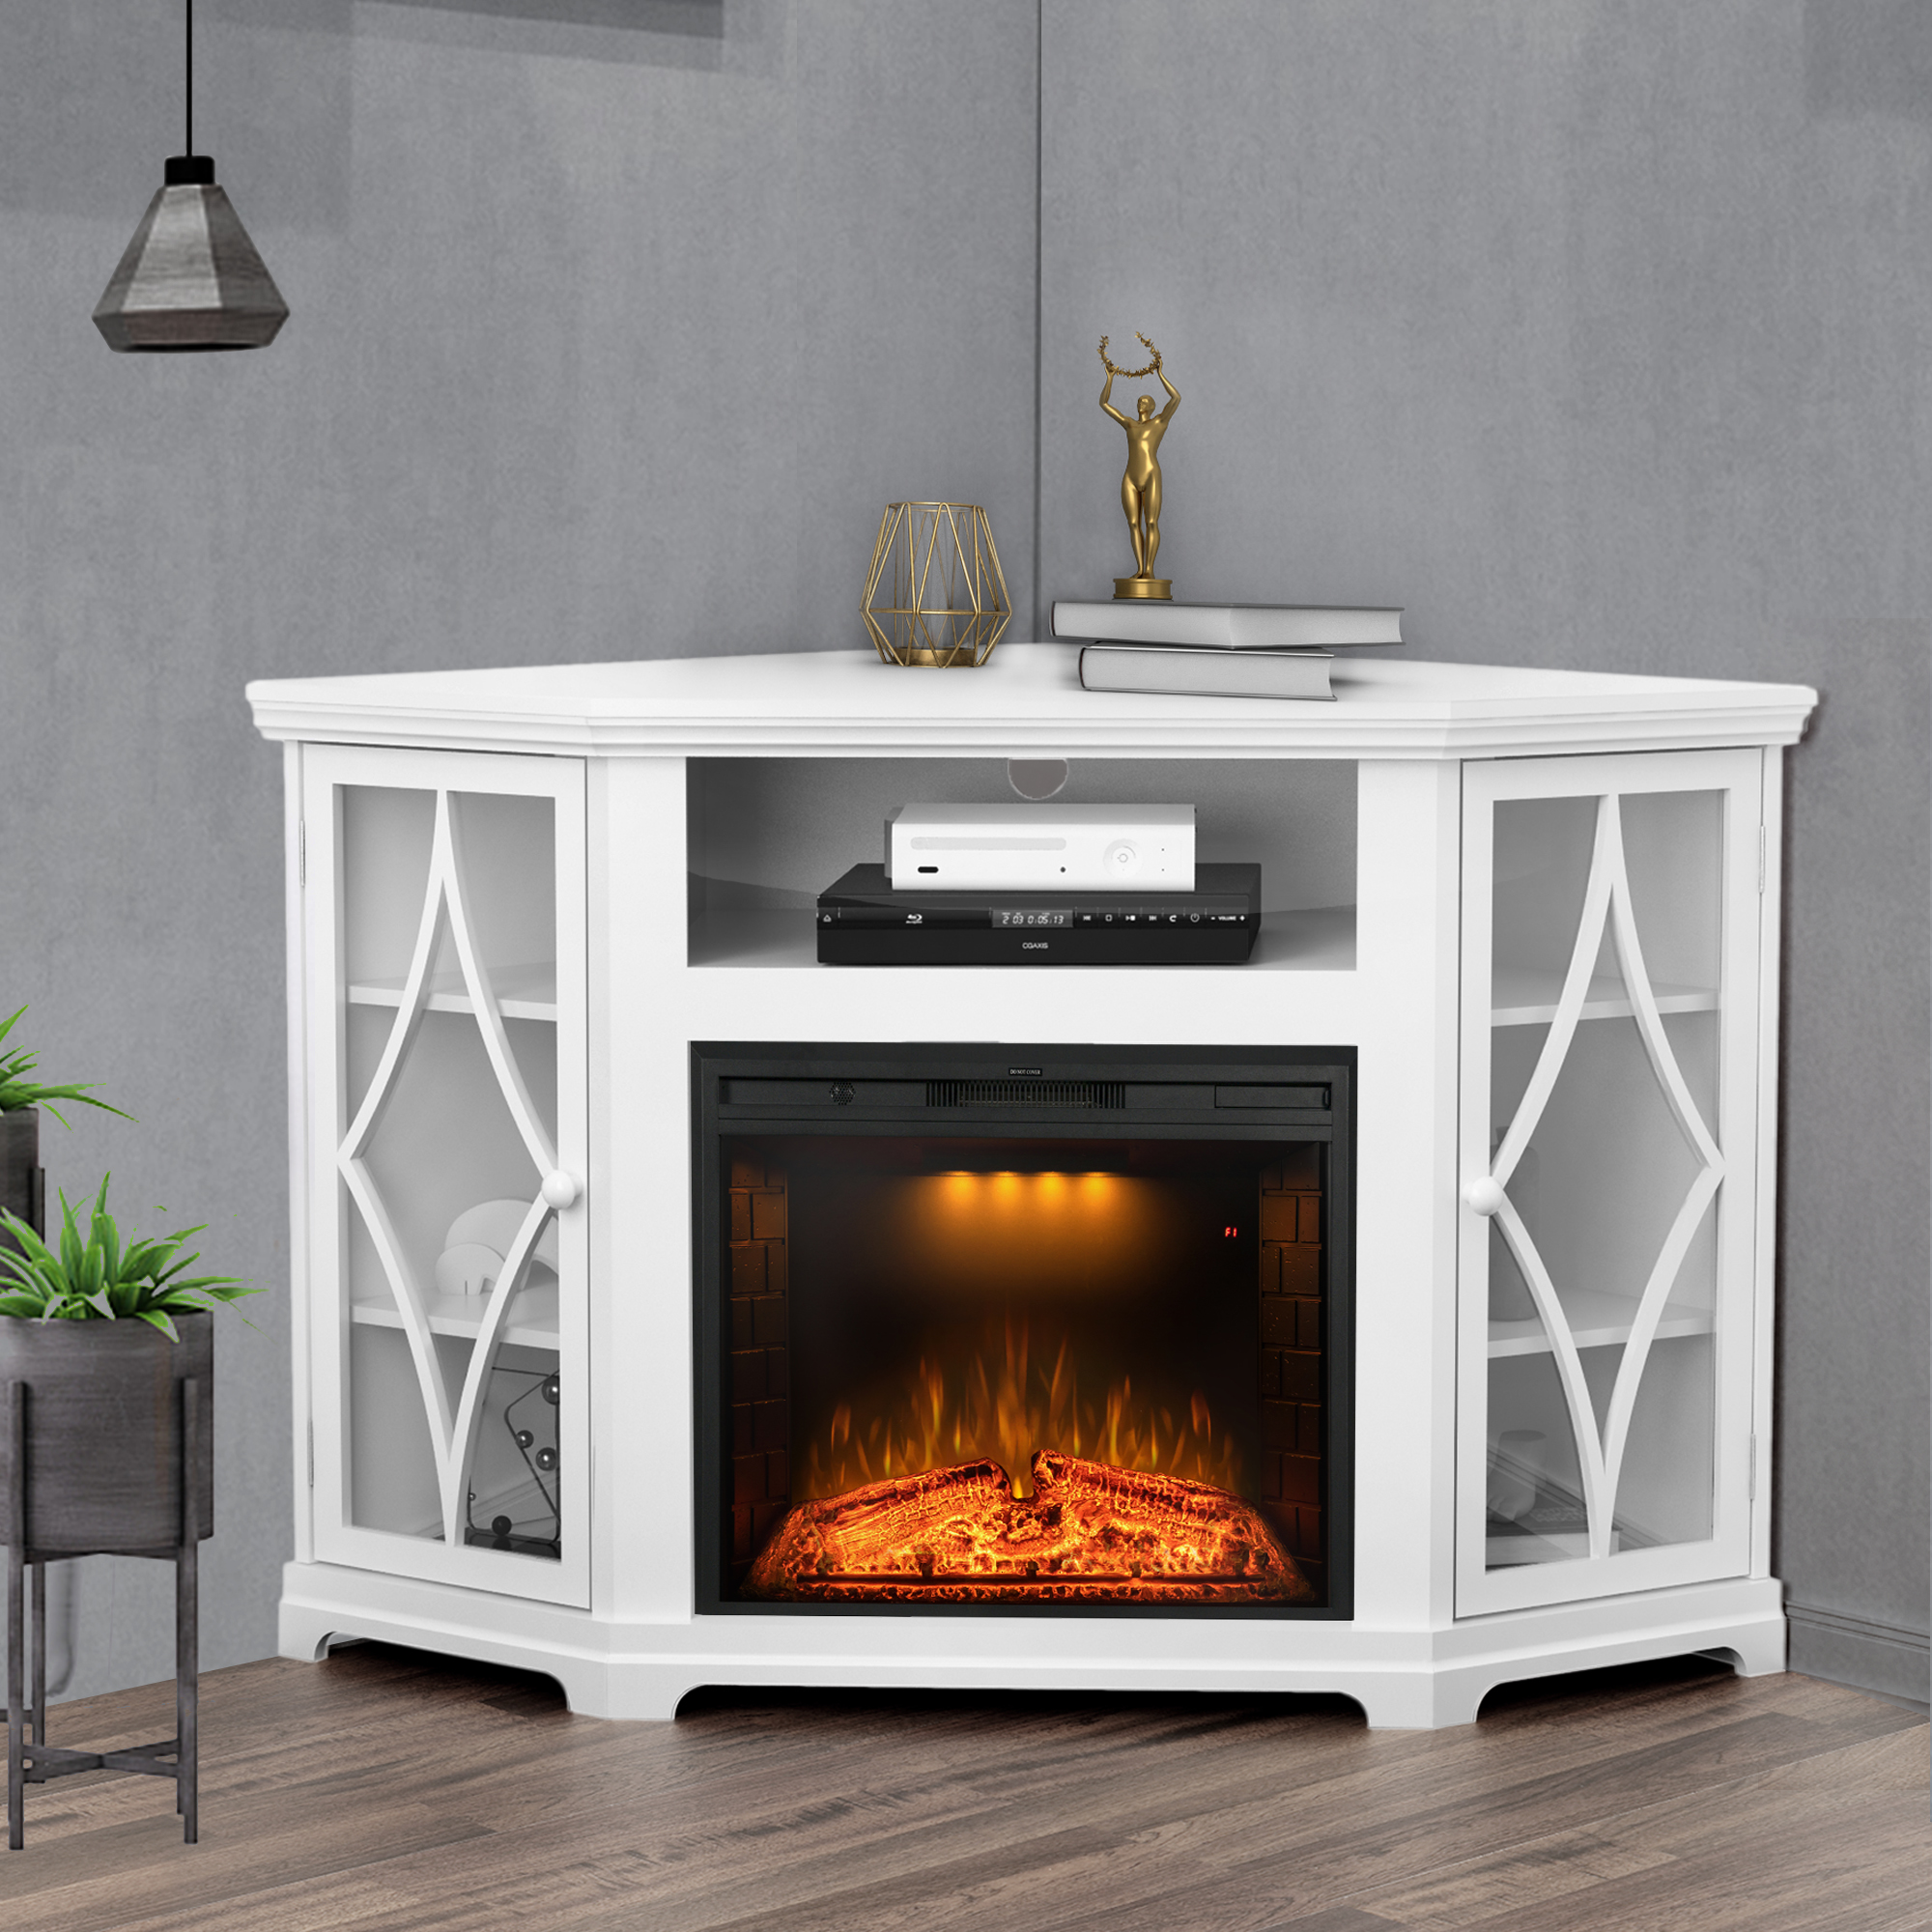 56" Corner Fireplace TV Stand for TV's up to 65 Inches, Entertainment Center TV Console with 25" Electric Fireplace, Adjustable Top Light & Flame Speed, Fire Crackling Sound, White